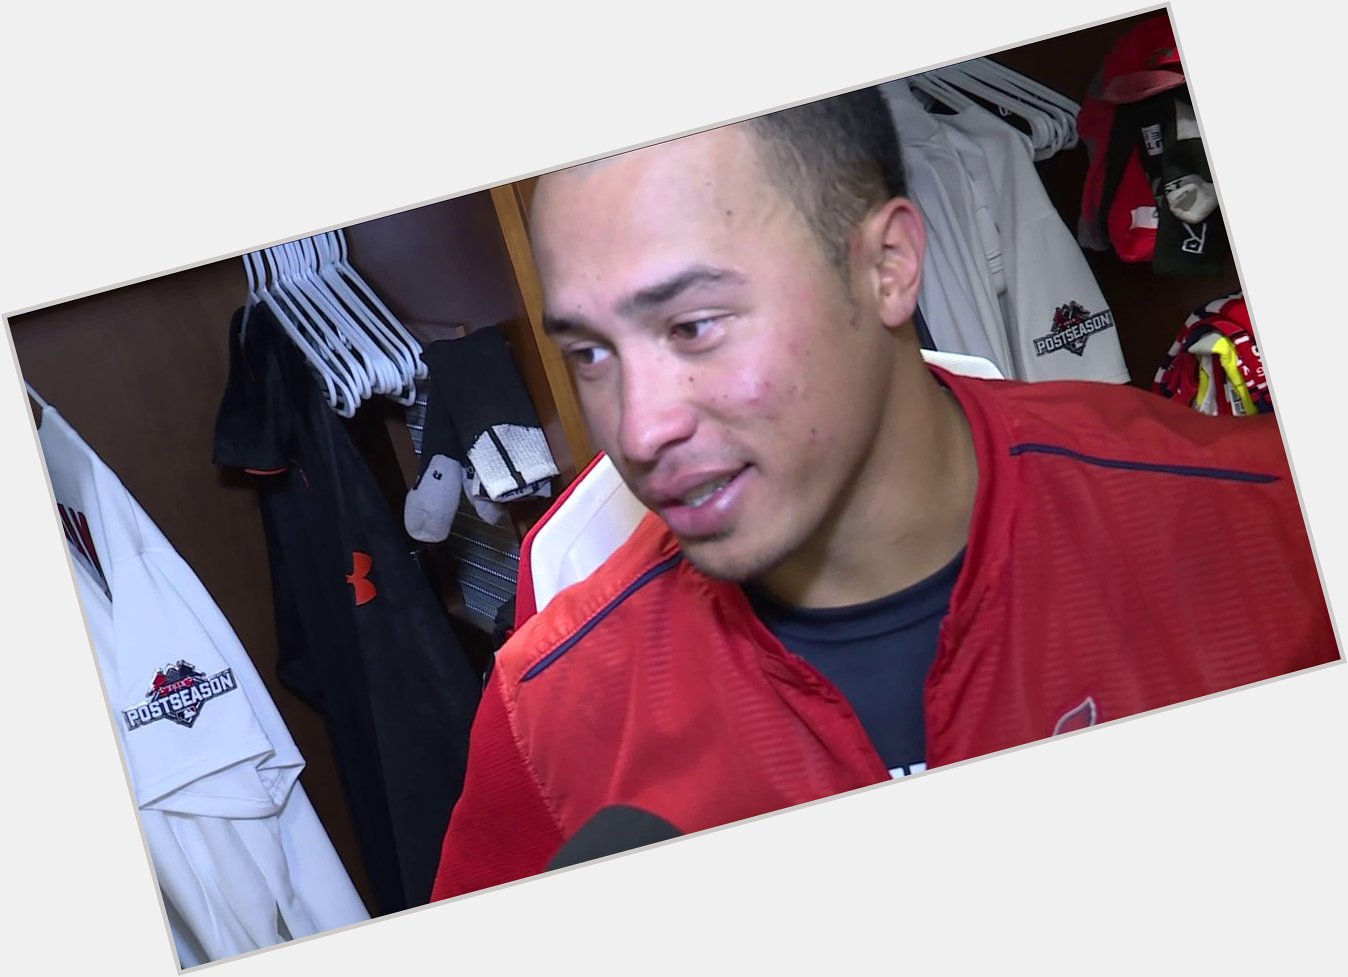 Happy 25th Birthday to infielder Kolten Wong! How about another victory for a present? 